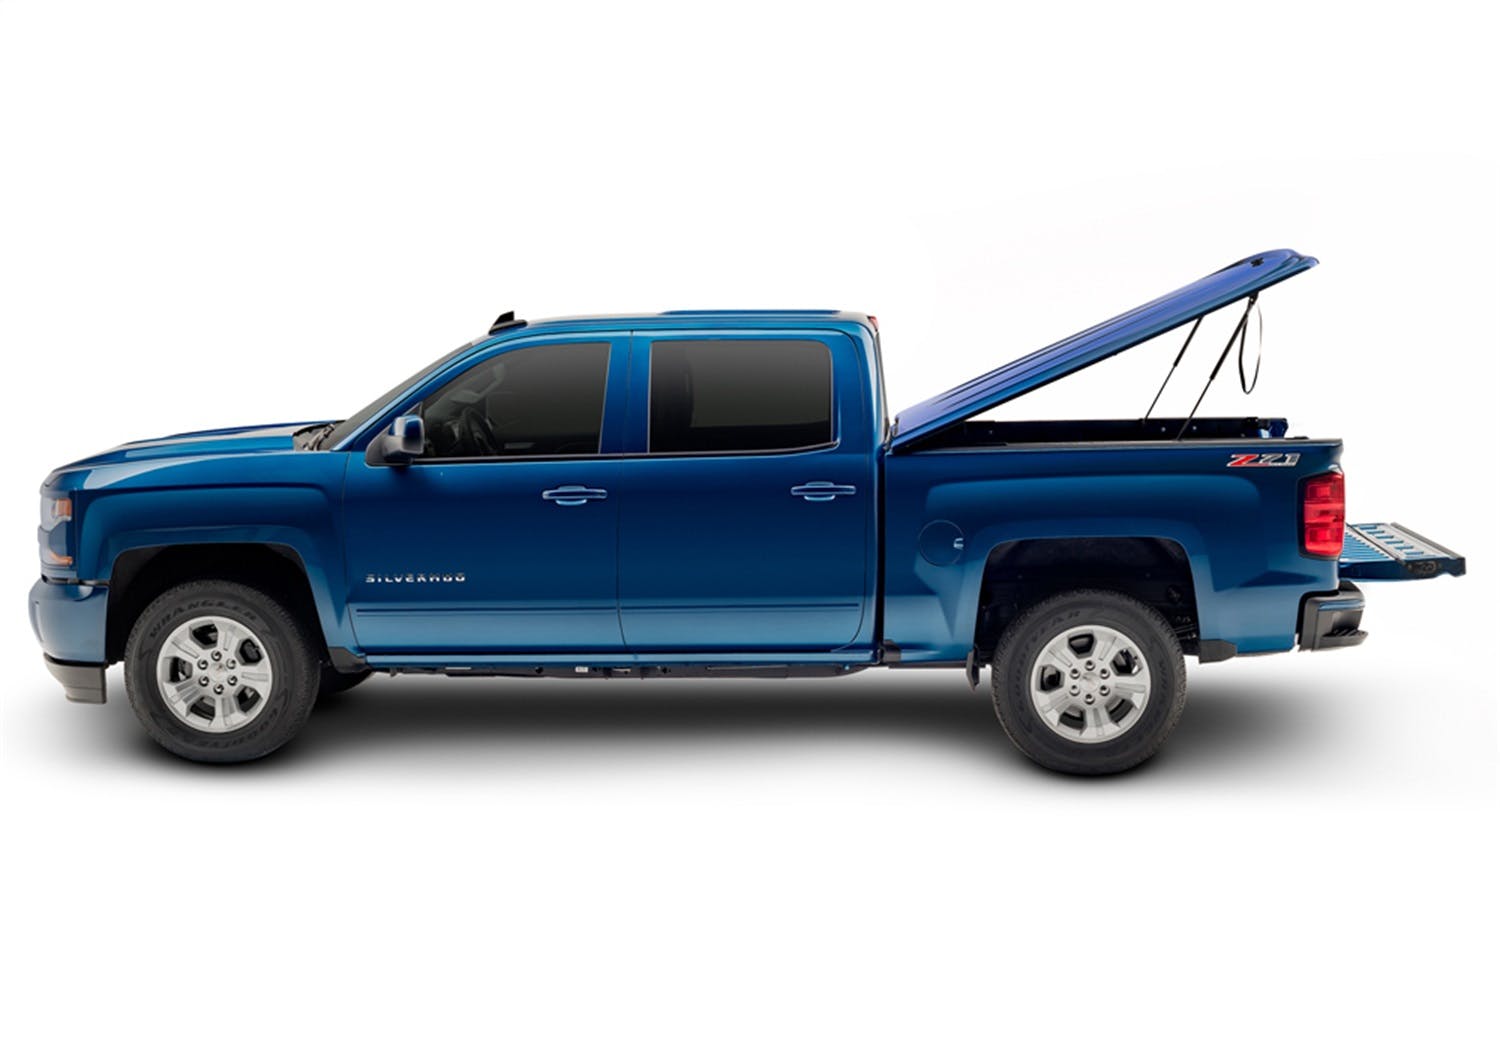 UnderCover UC4146S SE Smooth Tonneau Cover, Smooth-Ready To Paint